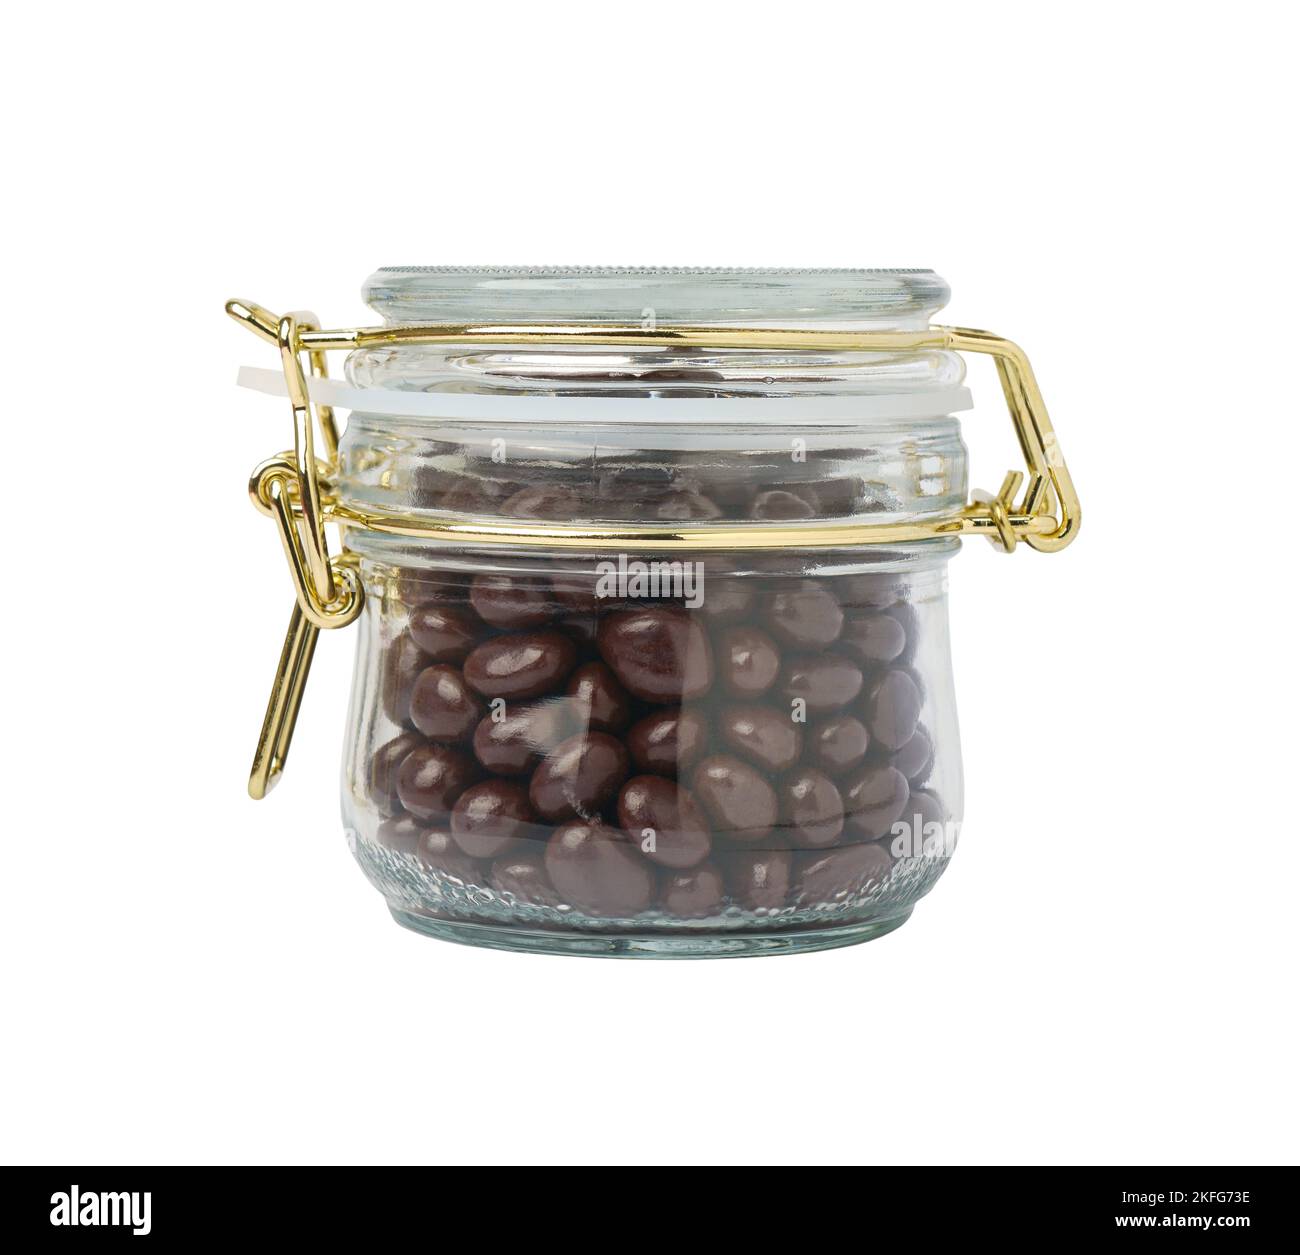 Closed glass jar with dragee chocolate-covered raisins, isolated on white background Stock Photo